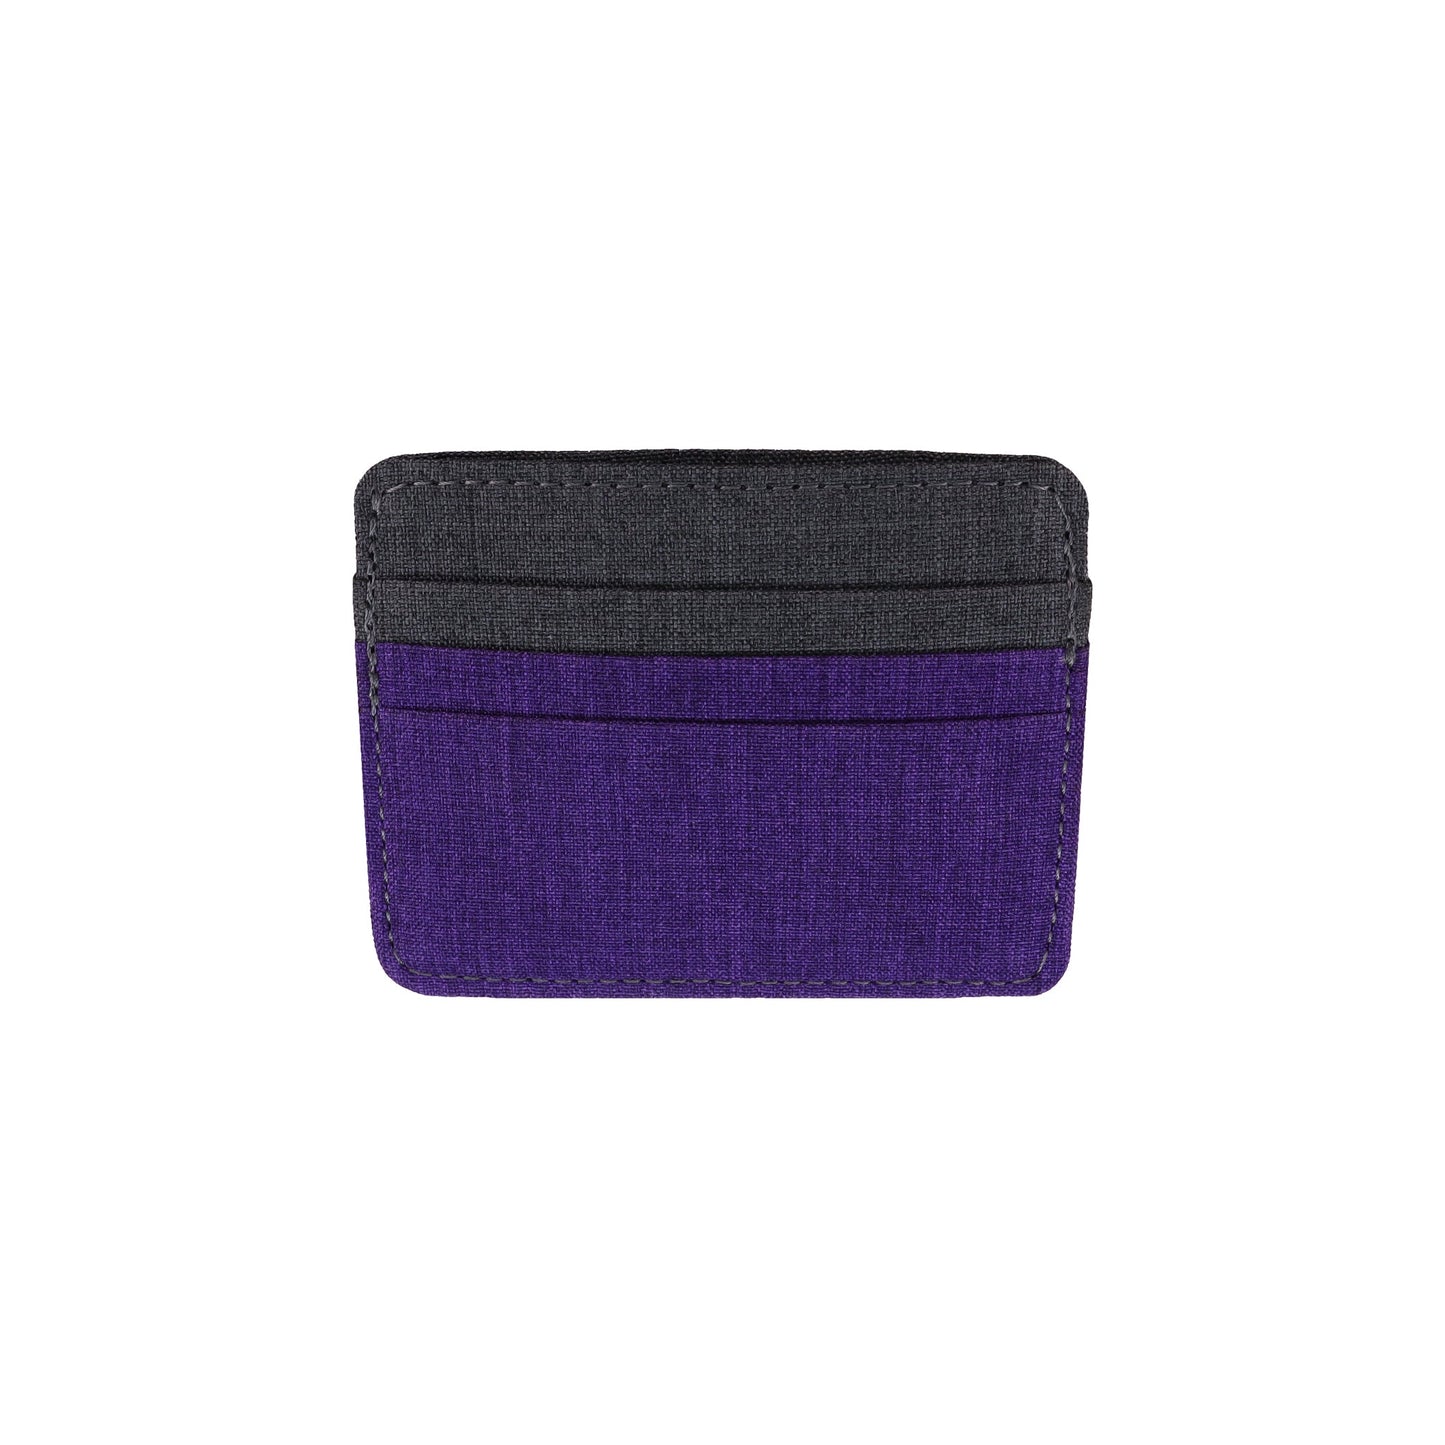 Purple and Gray Polyester Fabric Card Holder Wallet